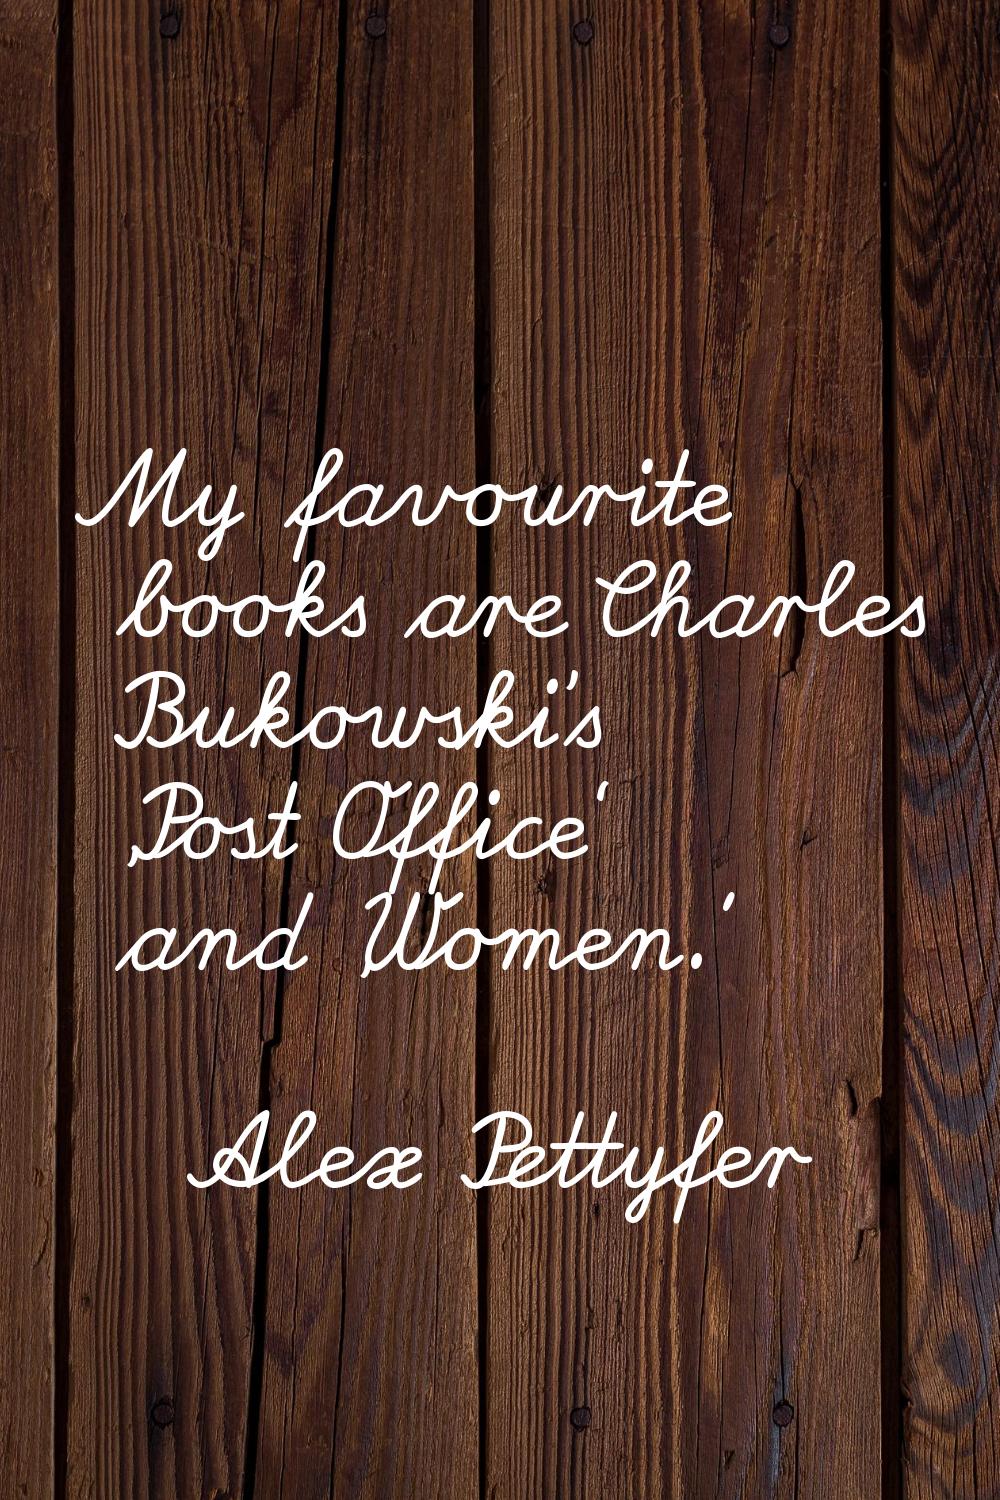 My favourite books are Charles Bukowski's 'Post Office' and 'Women.'